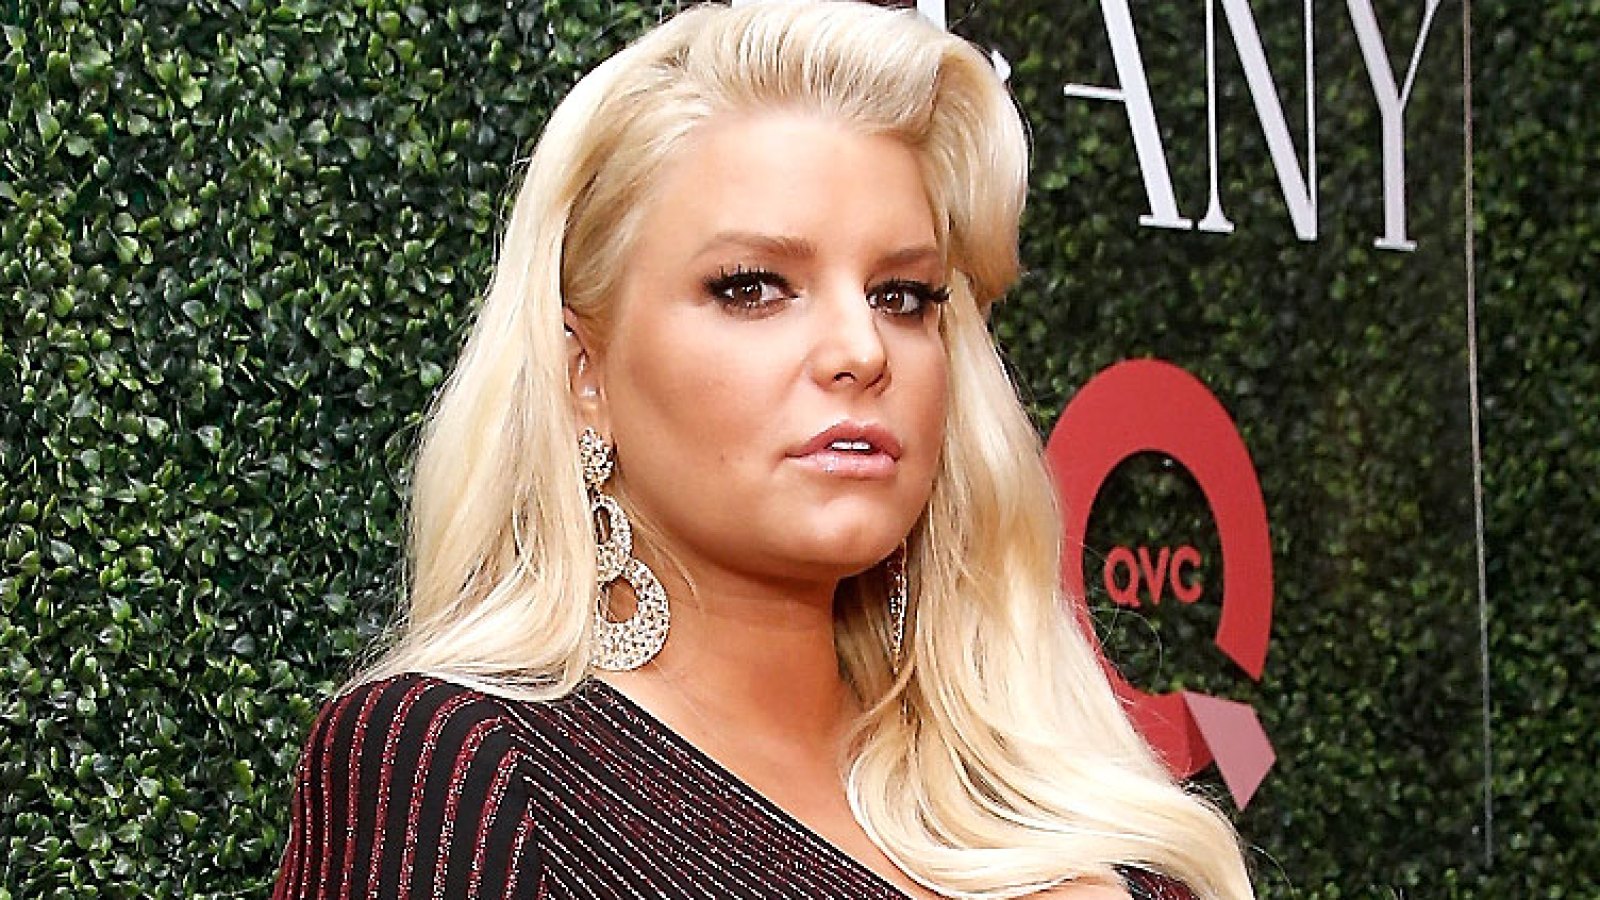 Jessica Simpson Details Her Painful Month Before Birth of Baby No. 3